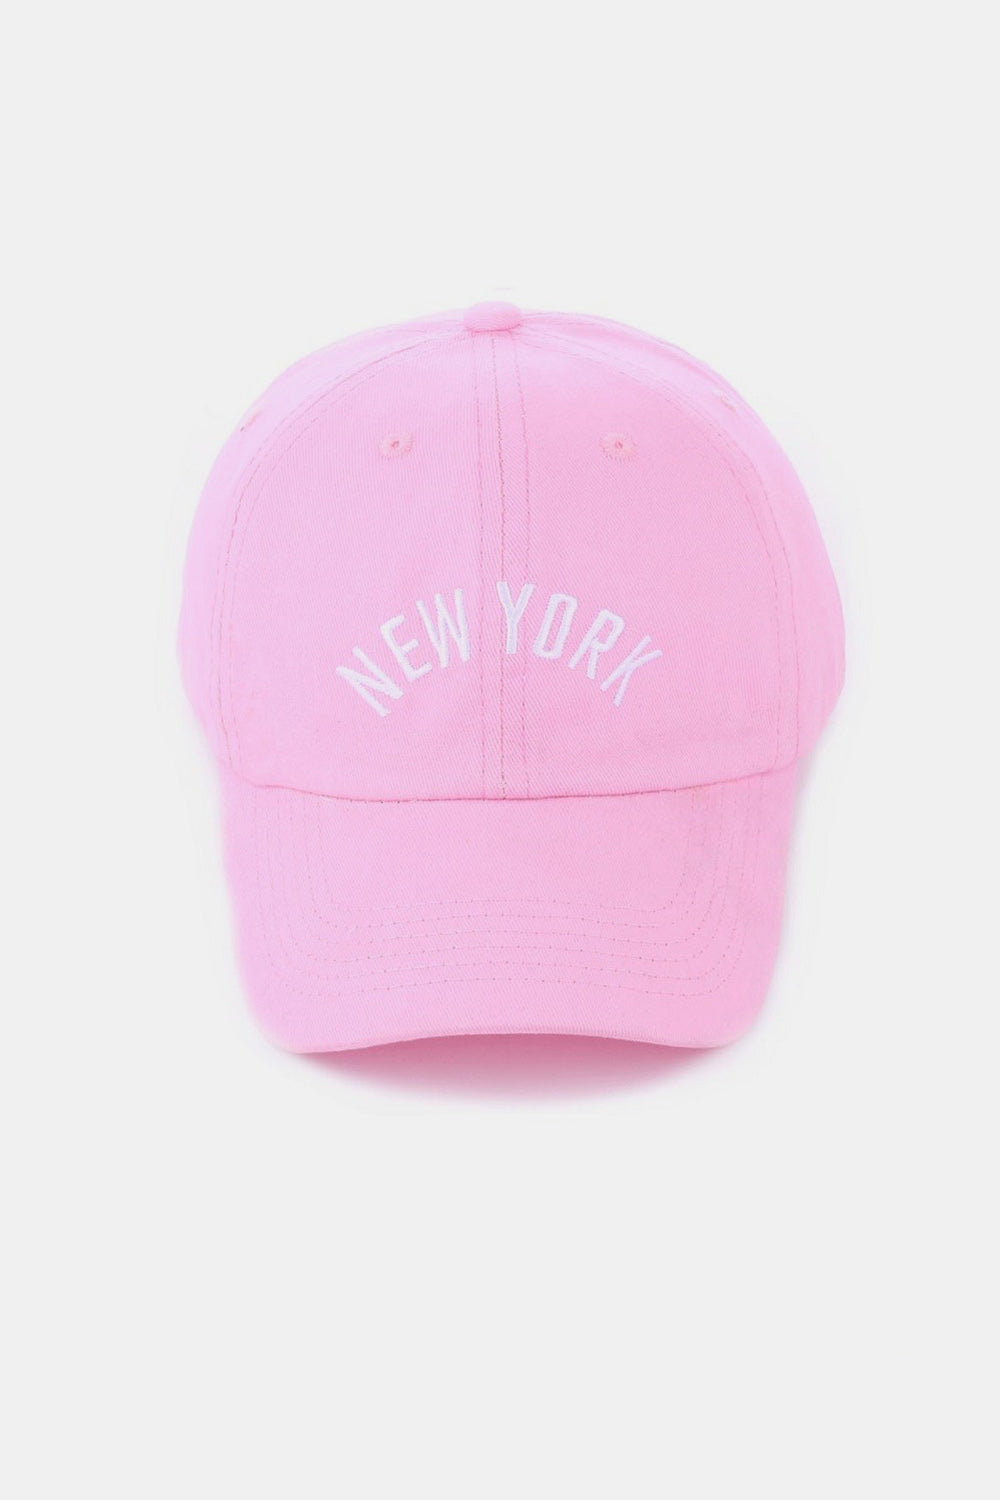 New York Pink / One Size